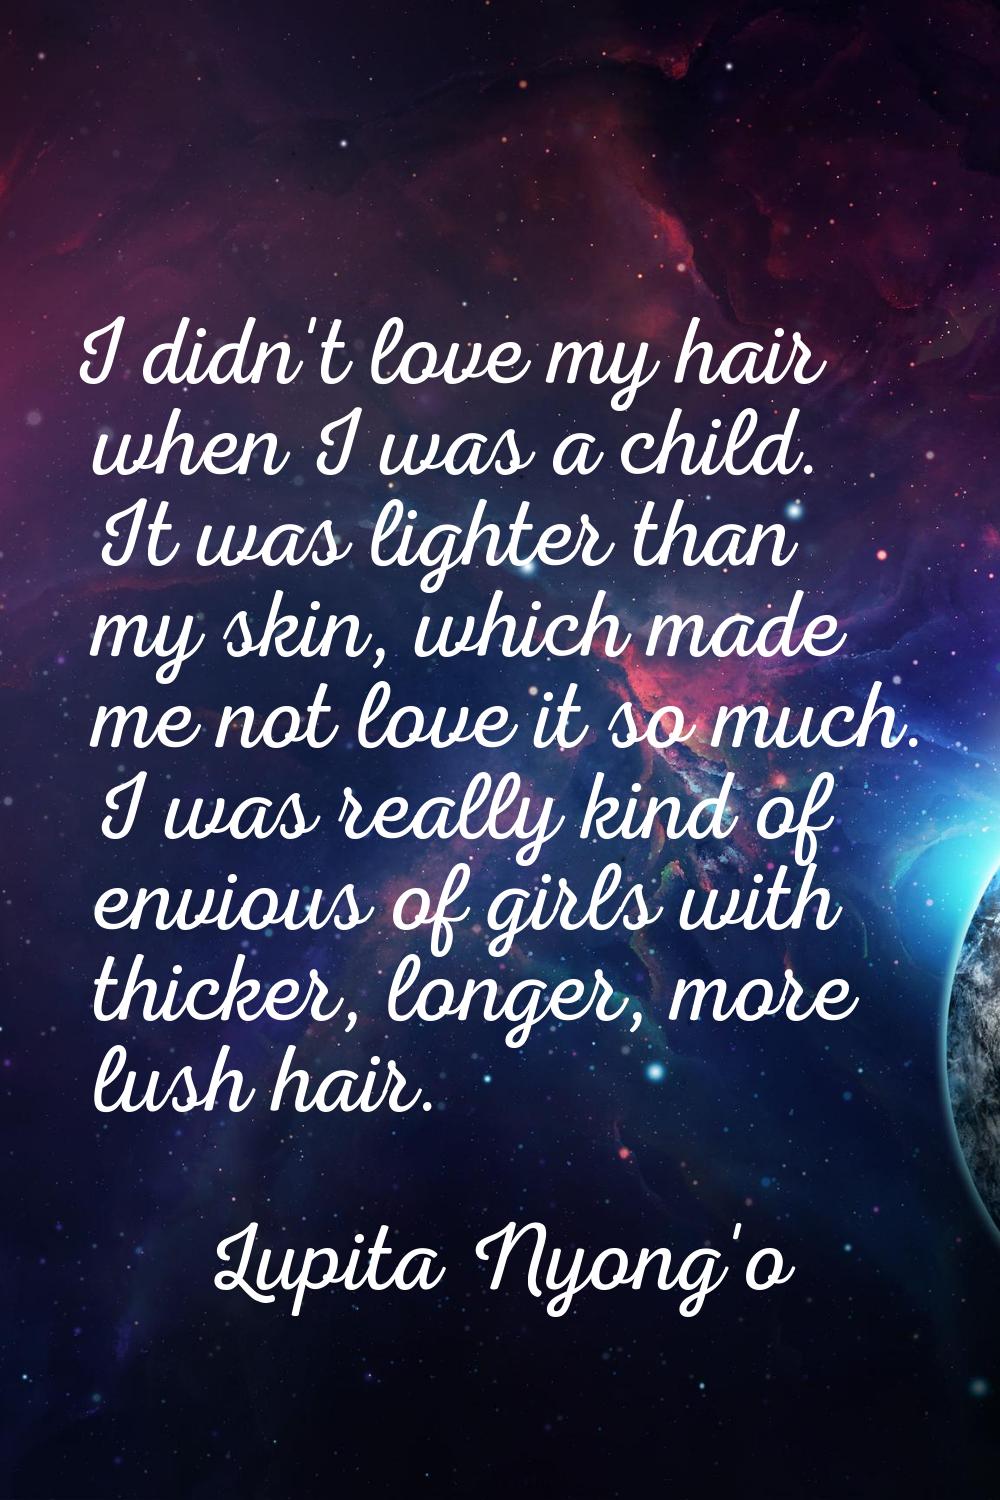 I didn't love my hair when I was a child. It was lighter than my skin, which made me not love it so